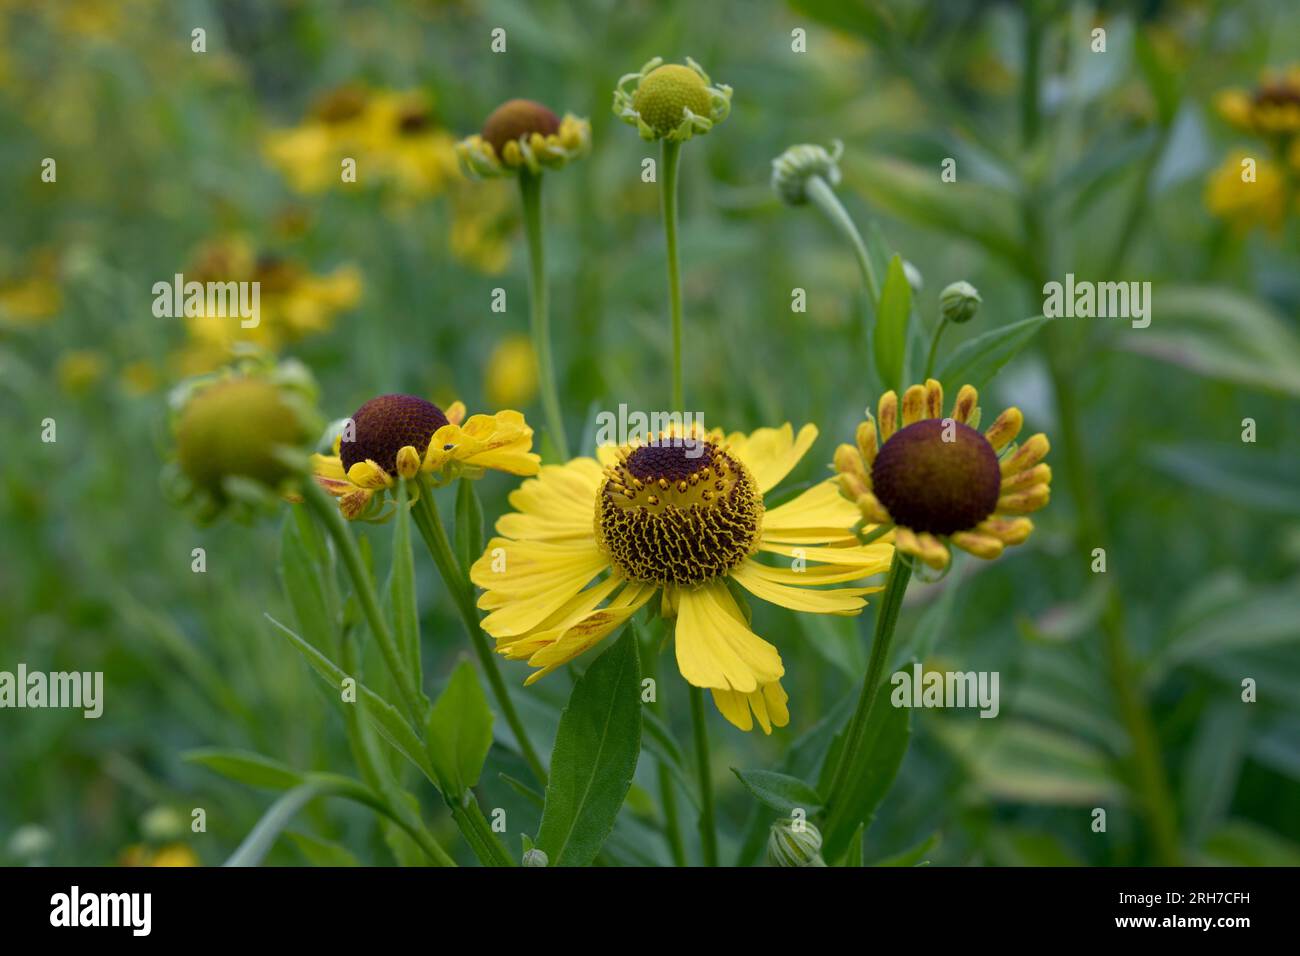 Helenium Riveron Beauty a summer flower with brighr yellow petals surronding a brown ball full of seeds Stock Photo